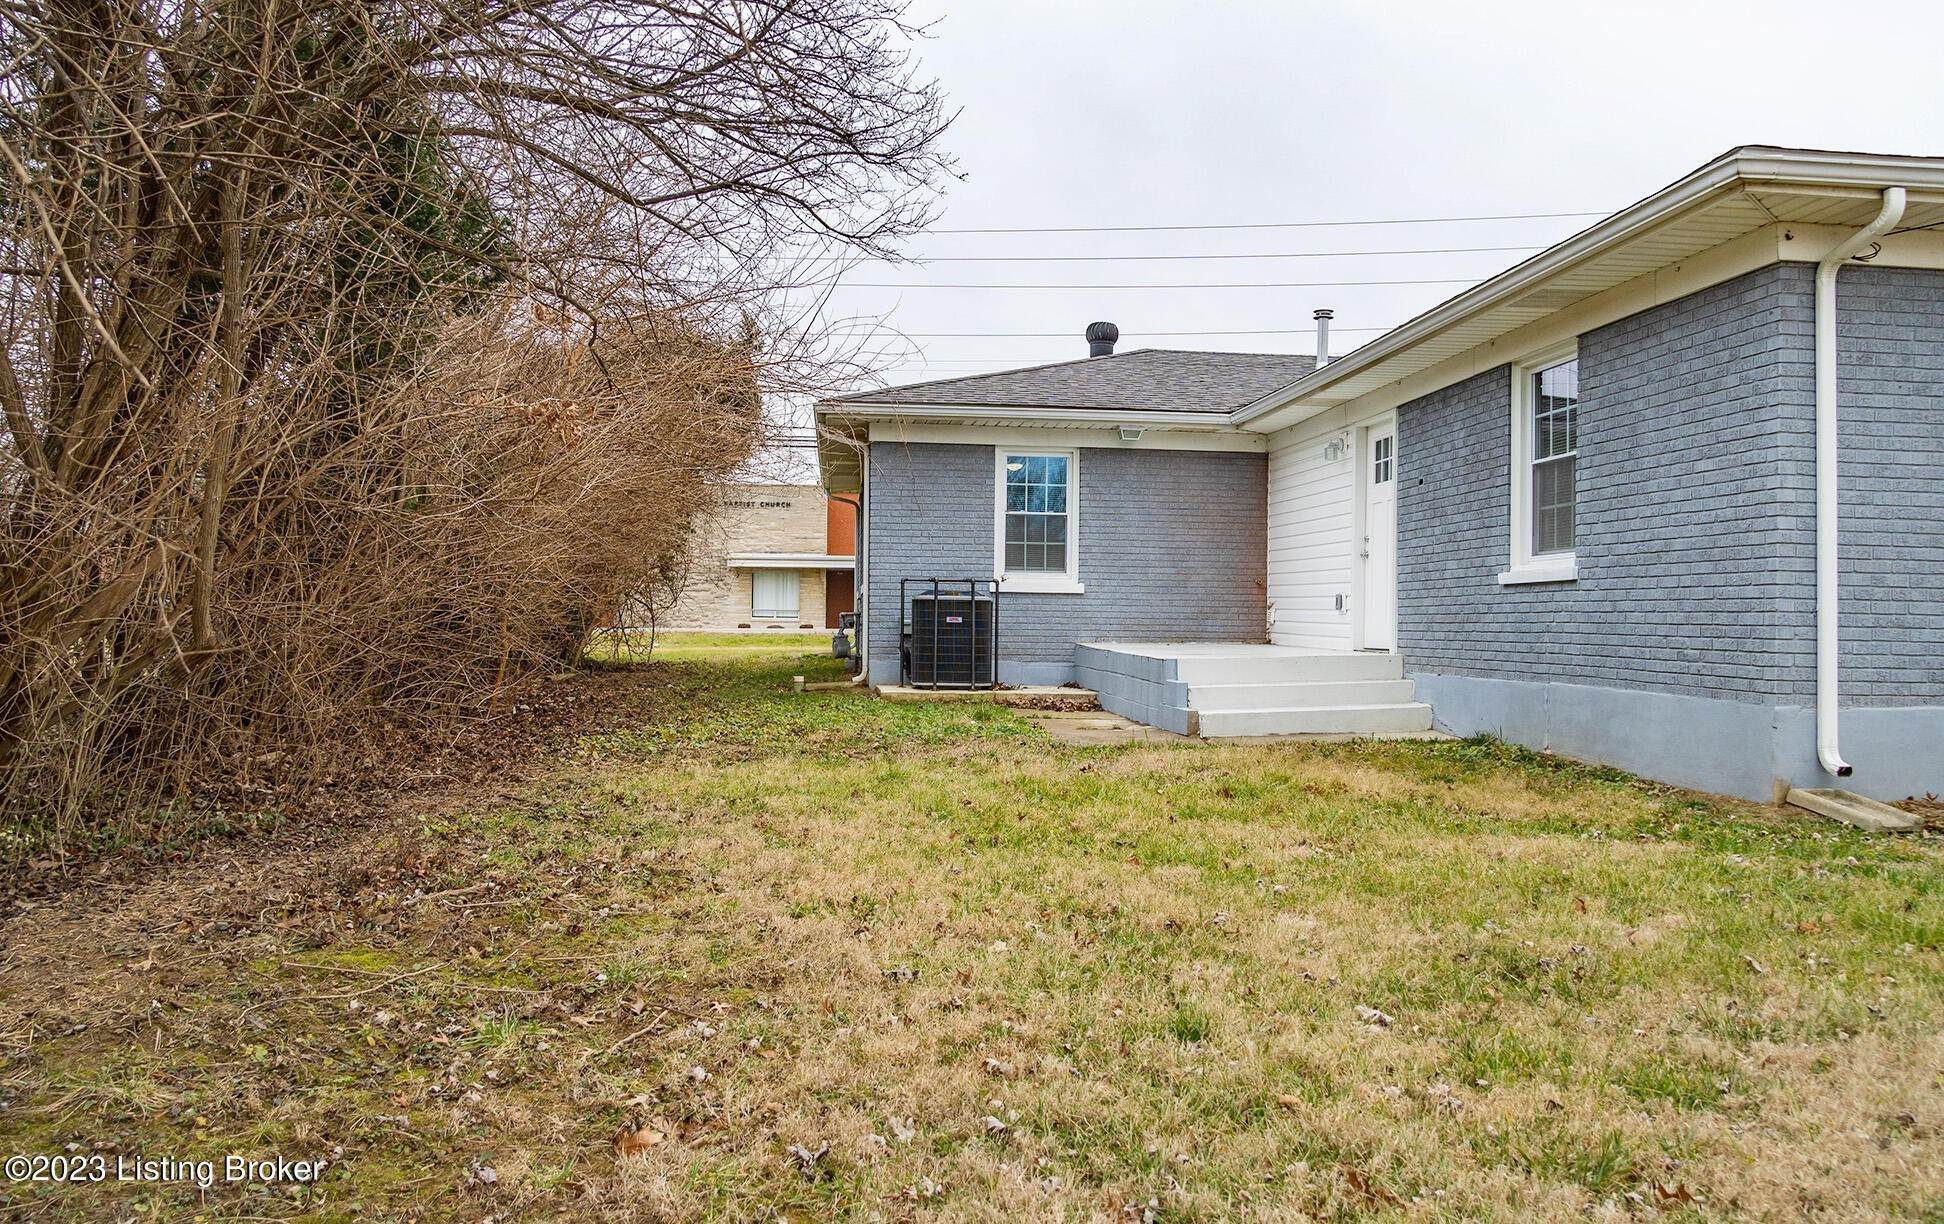 47. Single Family at Louisville, KY 40216